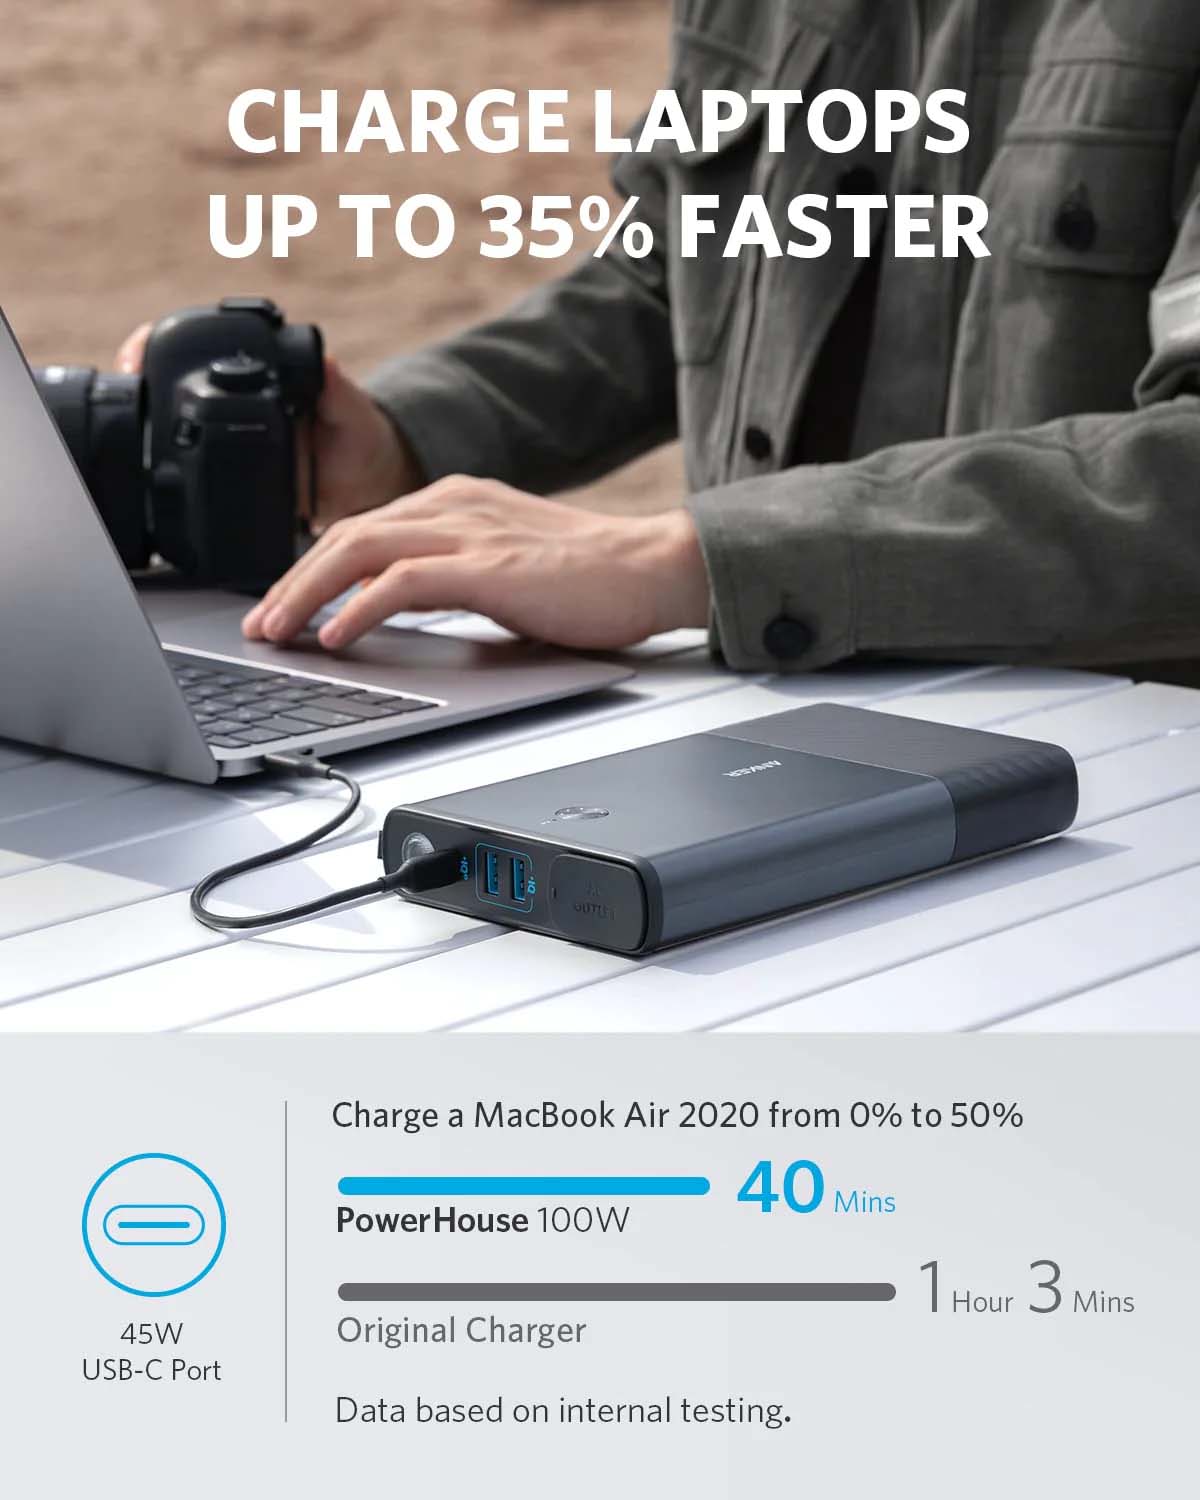 The The Anker 511 PowerHouse Charges Laptops Up To 35% Faster